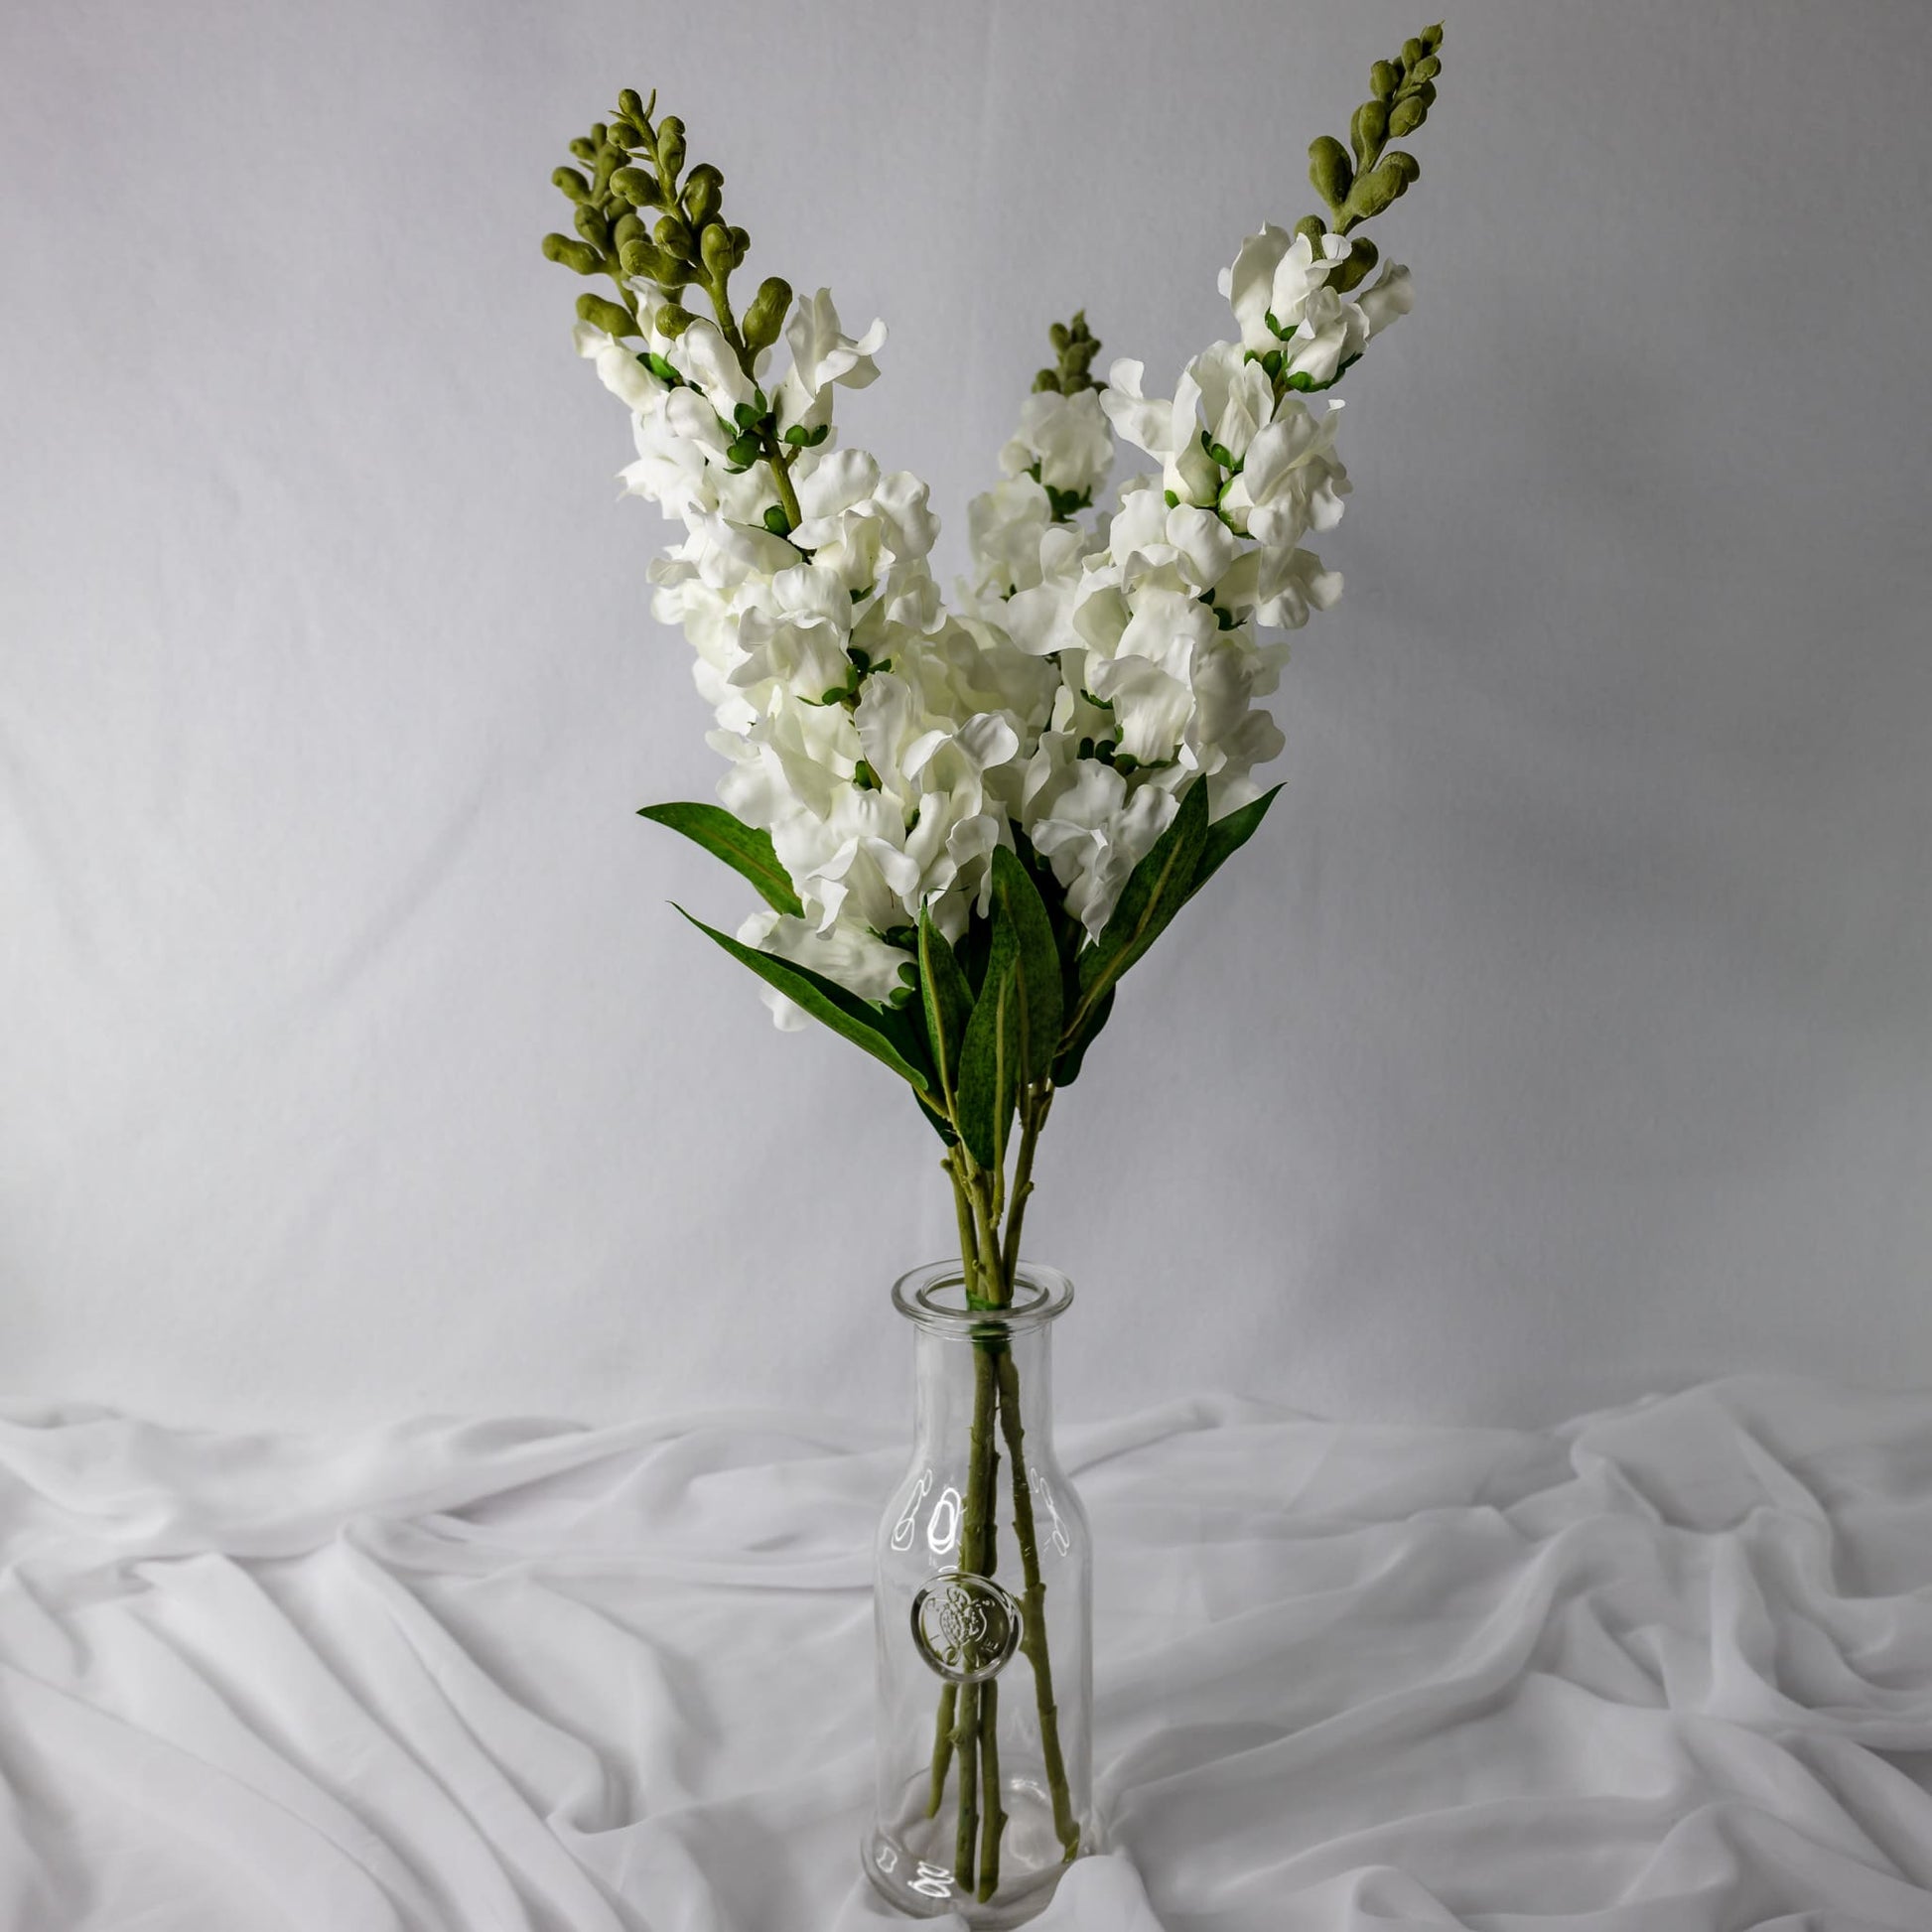 artificial white snap dragons in glass vase